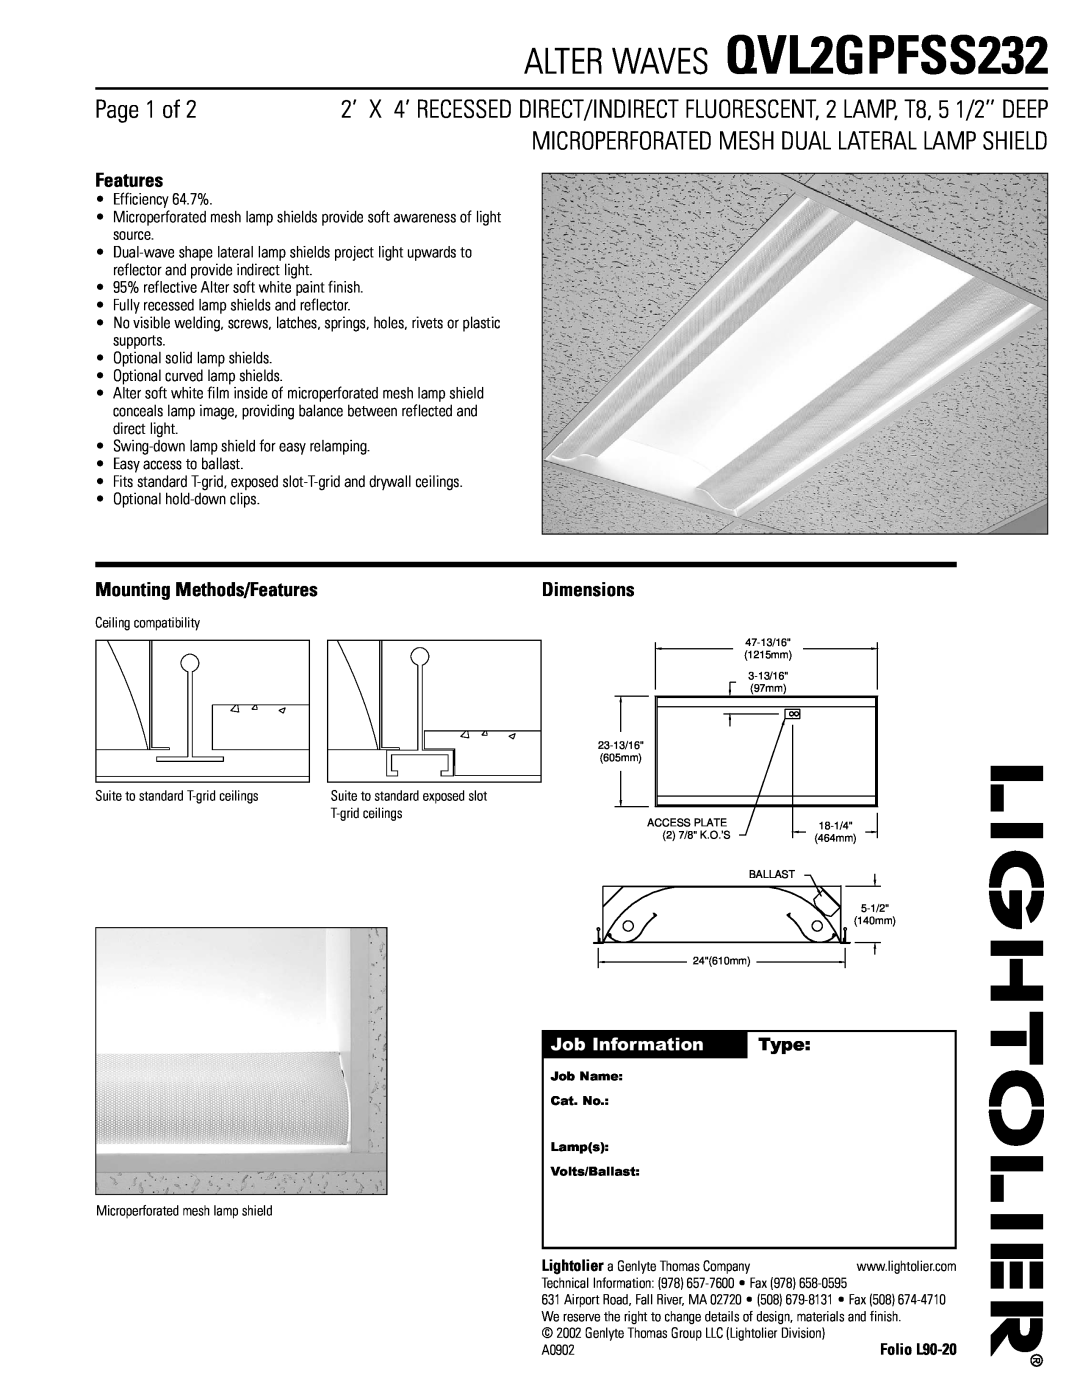 Lightolier dimensions ALTER WAVES QVL2GPFSS232, Page 1 of, Microperforated Mesh Dual Lateral Lamp Shield, Features 